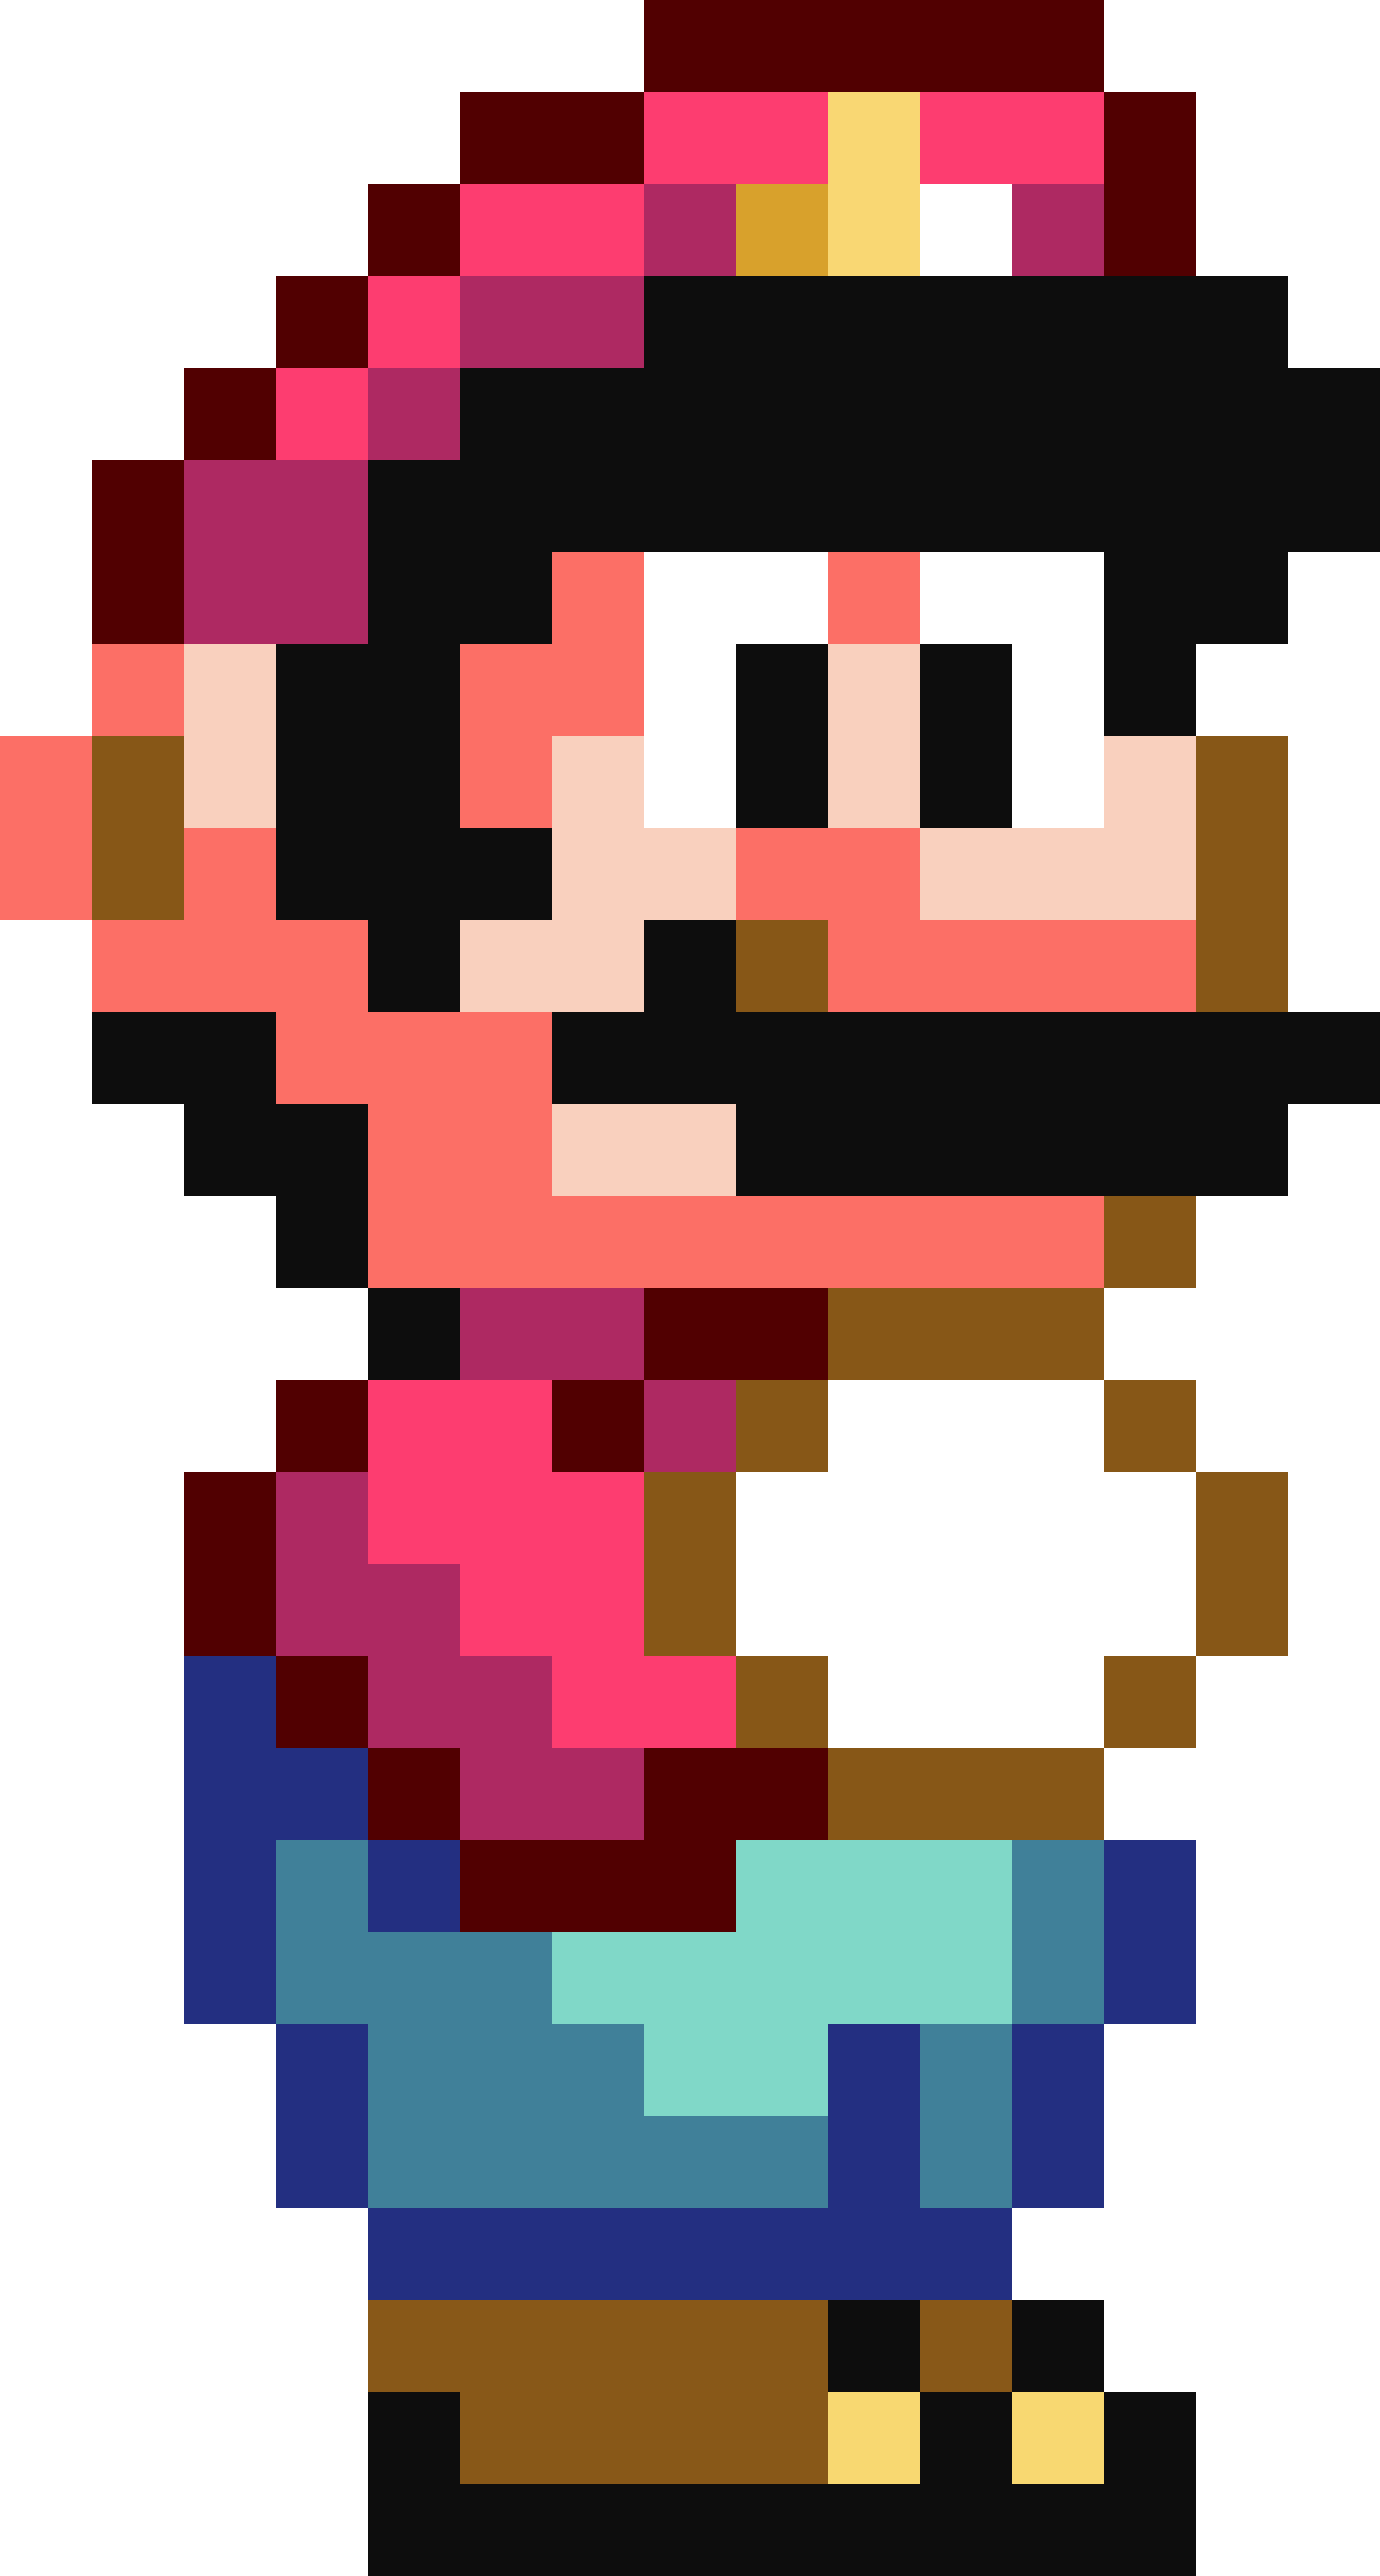 an image of the Mario character